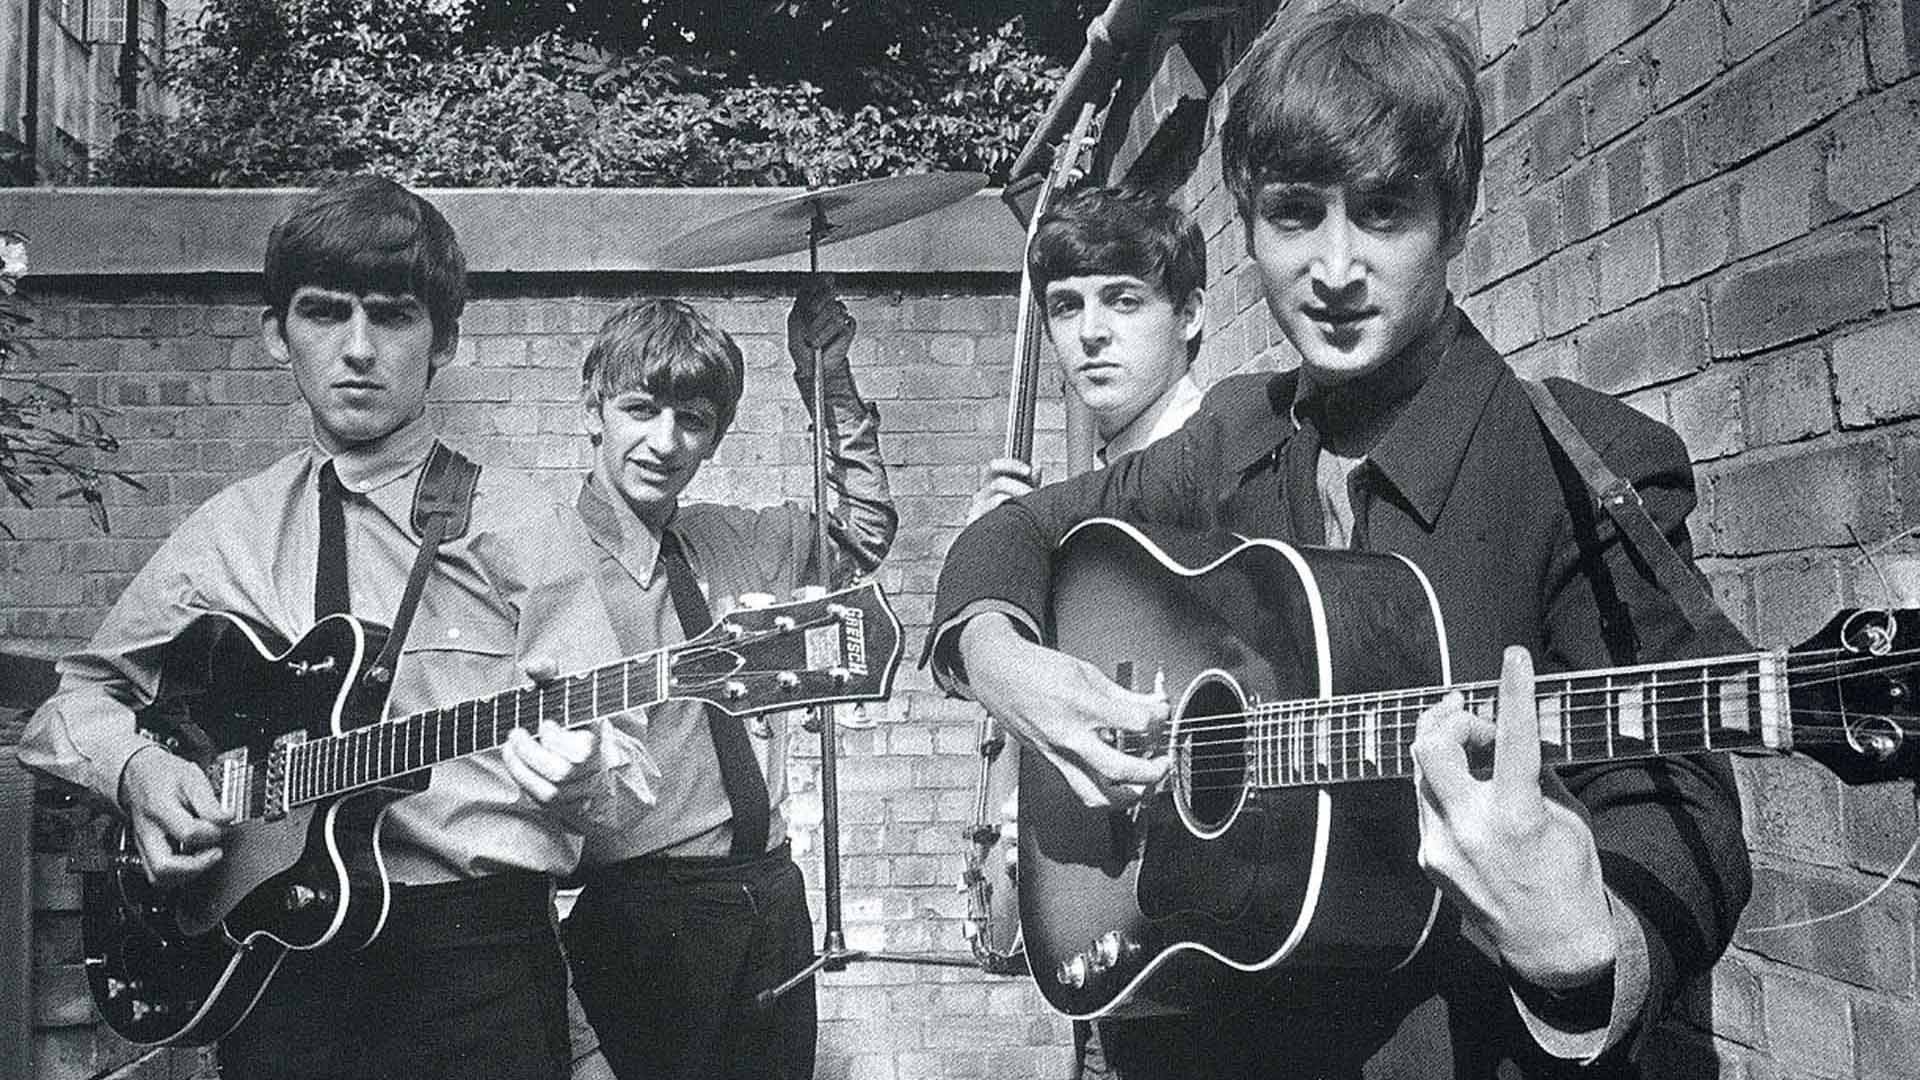  Beatles  wallpaper    Download free amazing wallpapers  for 